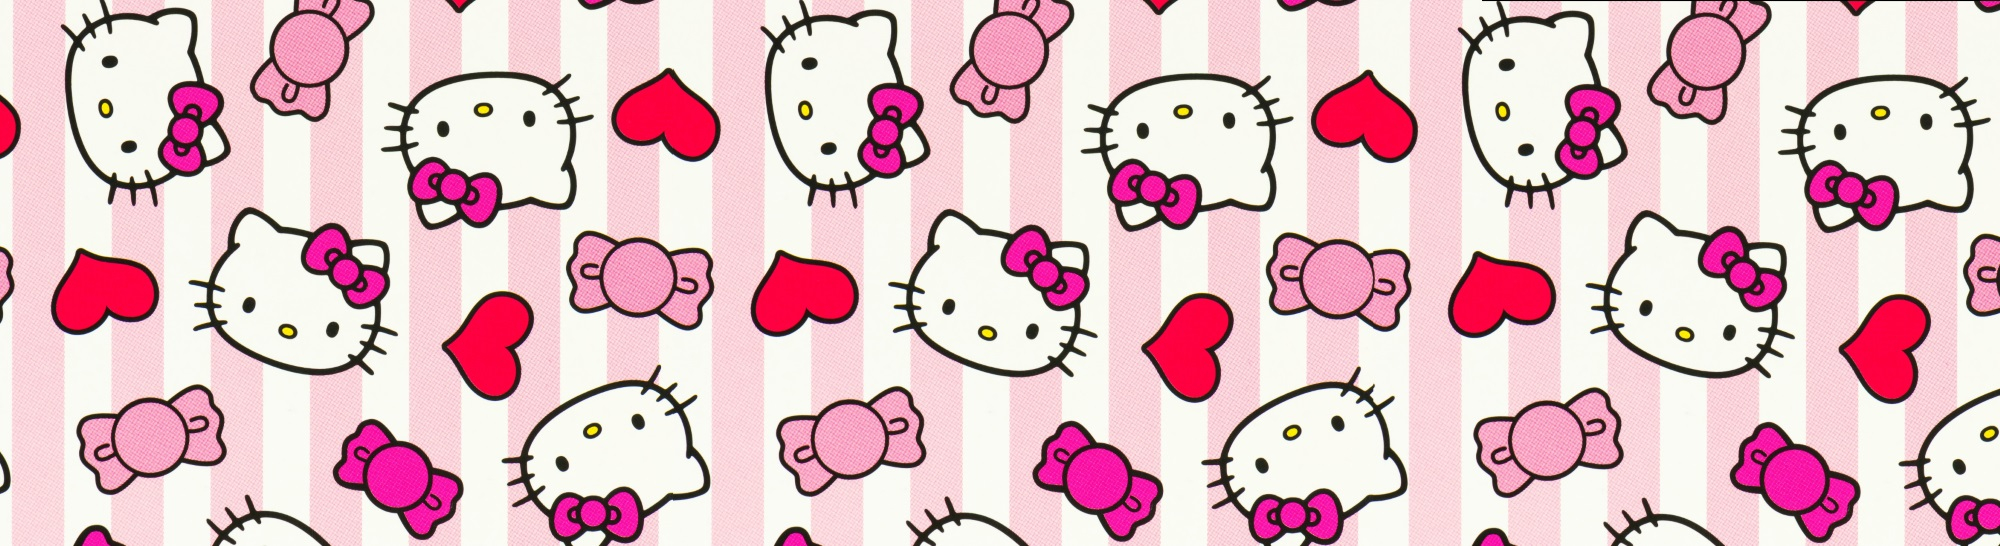 Hello Kitty Banner Banners & Signs Party Décor lifepharmafze